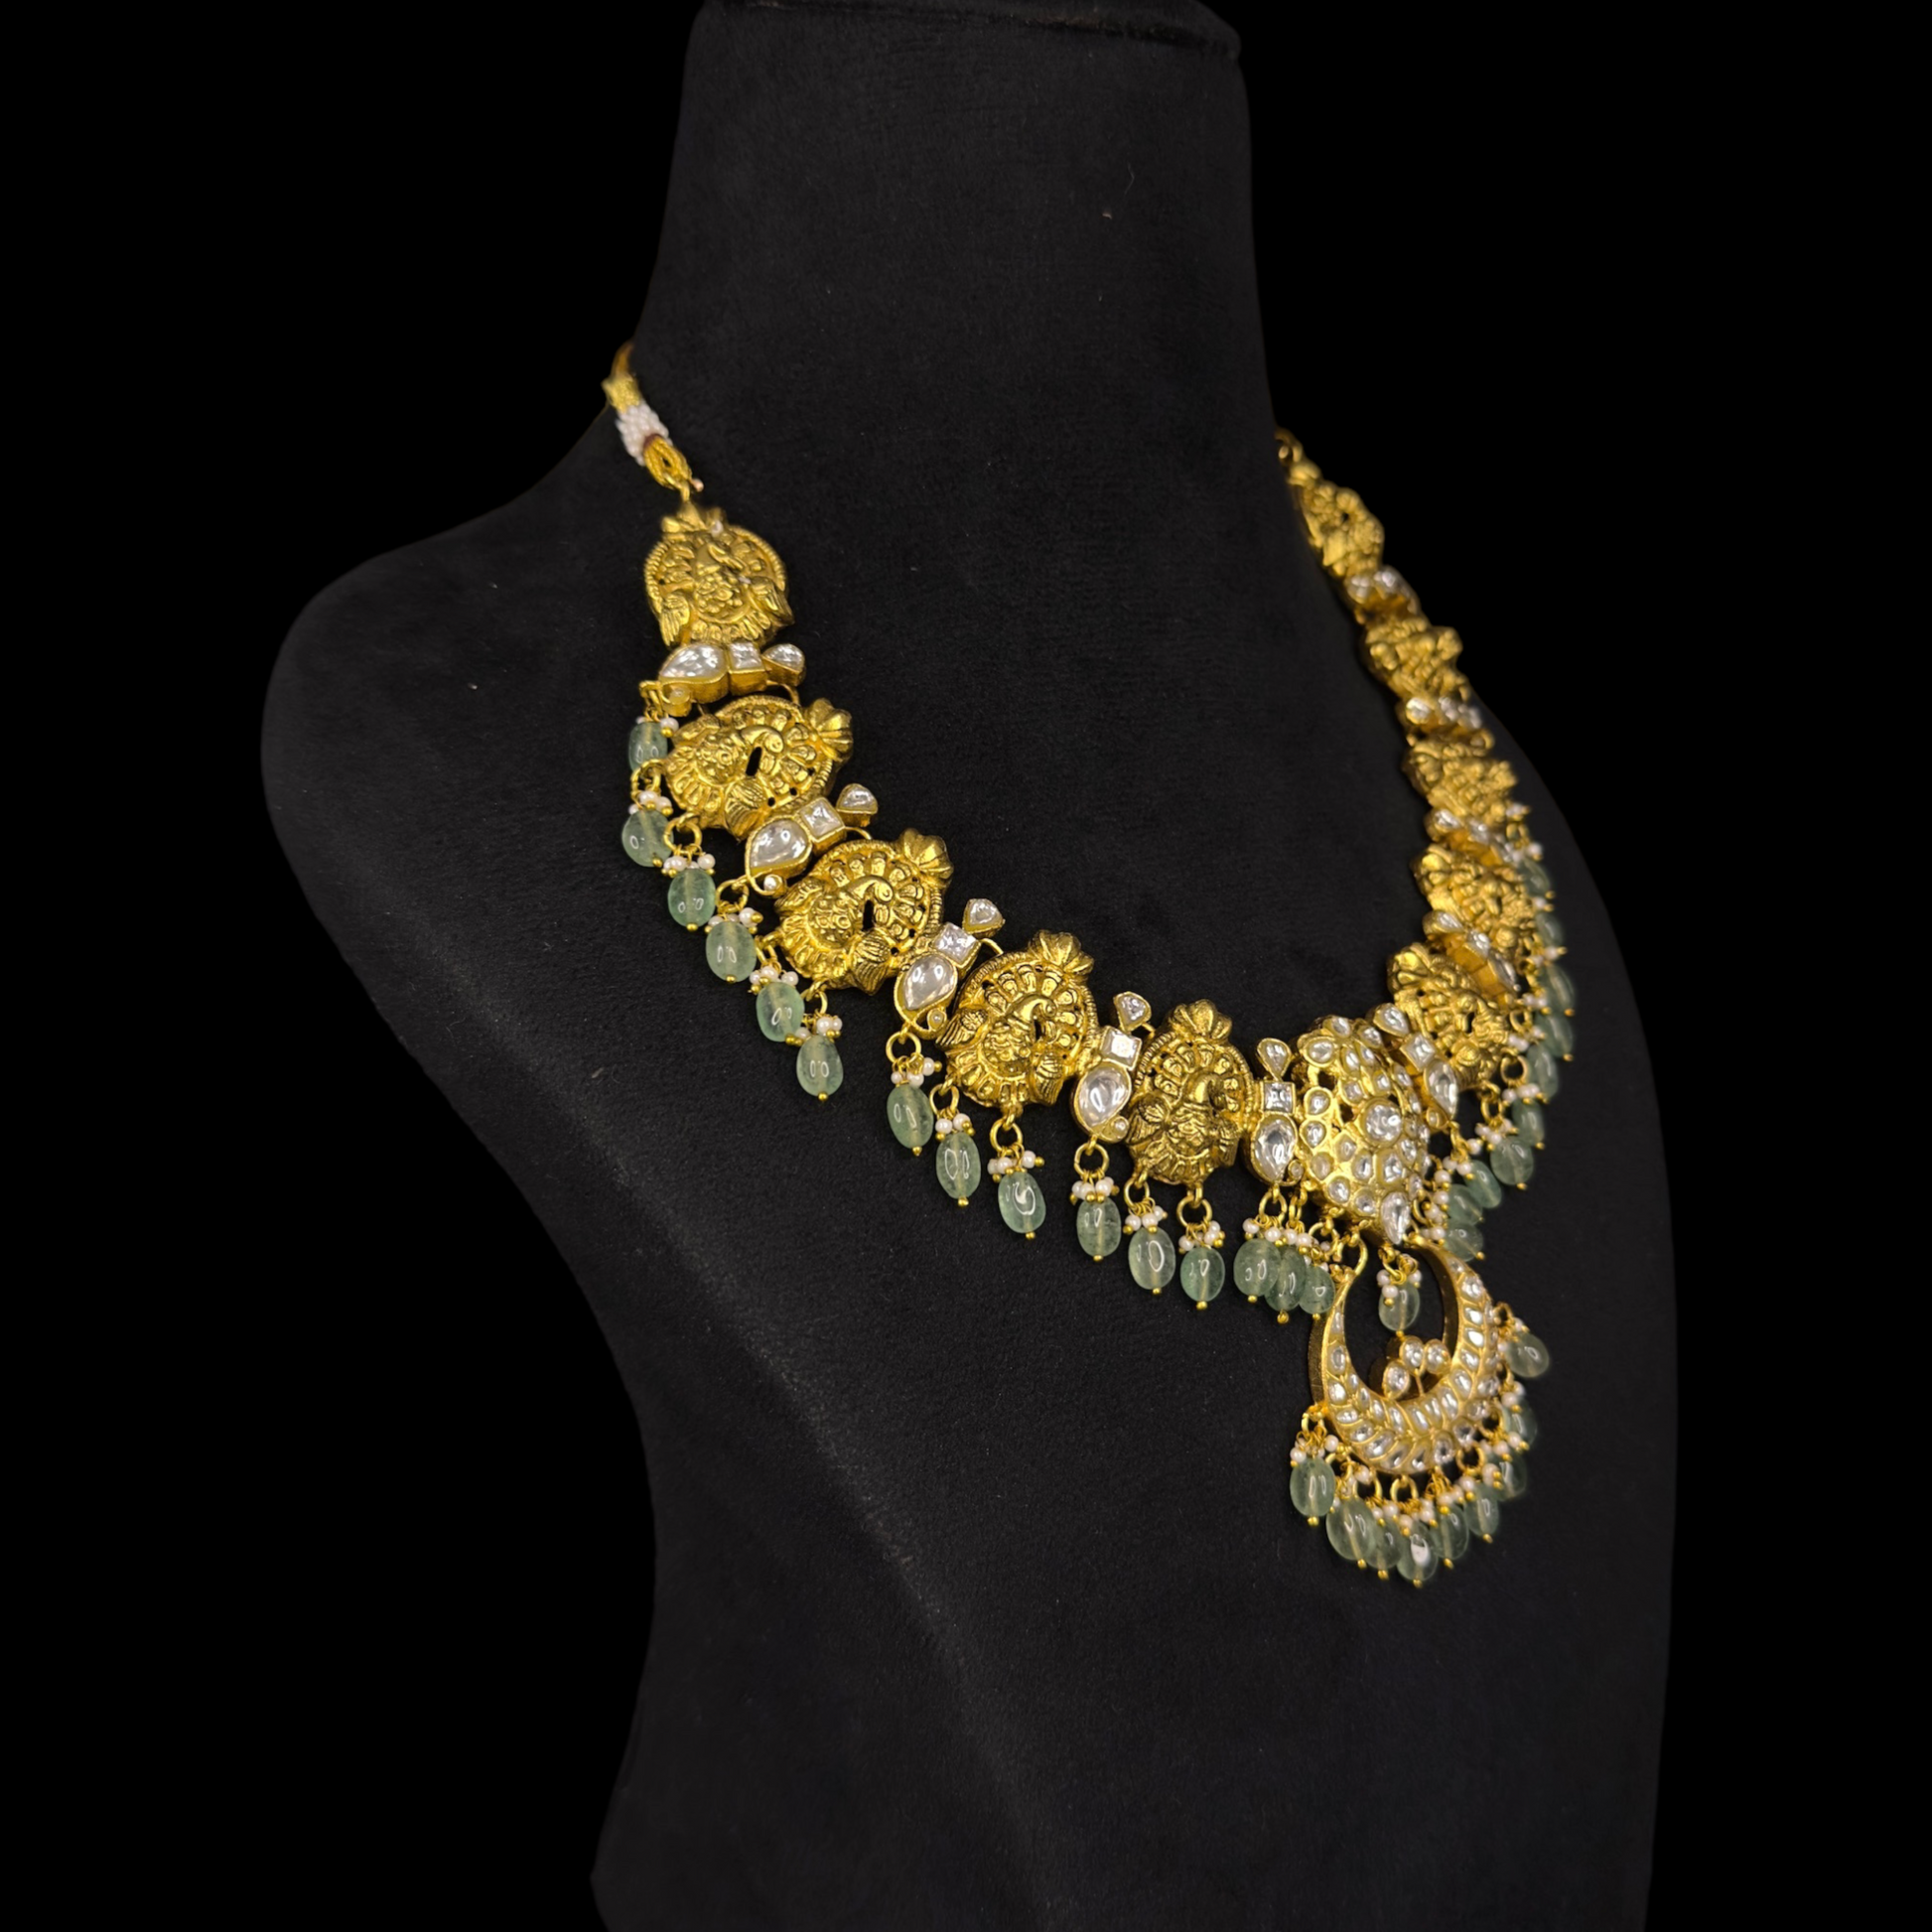 Ornate Peacock Jadau Kundan Necklace with Green Bead Accents with 22k gold plating This Product Belongs to Jadau Kundan Jewellery Category